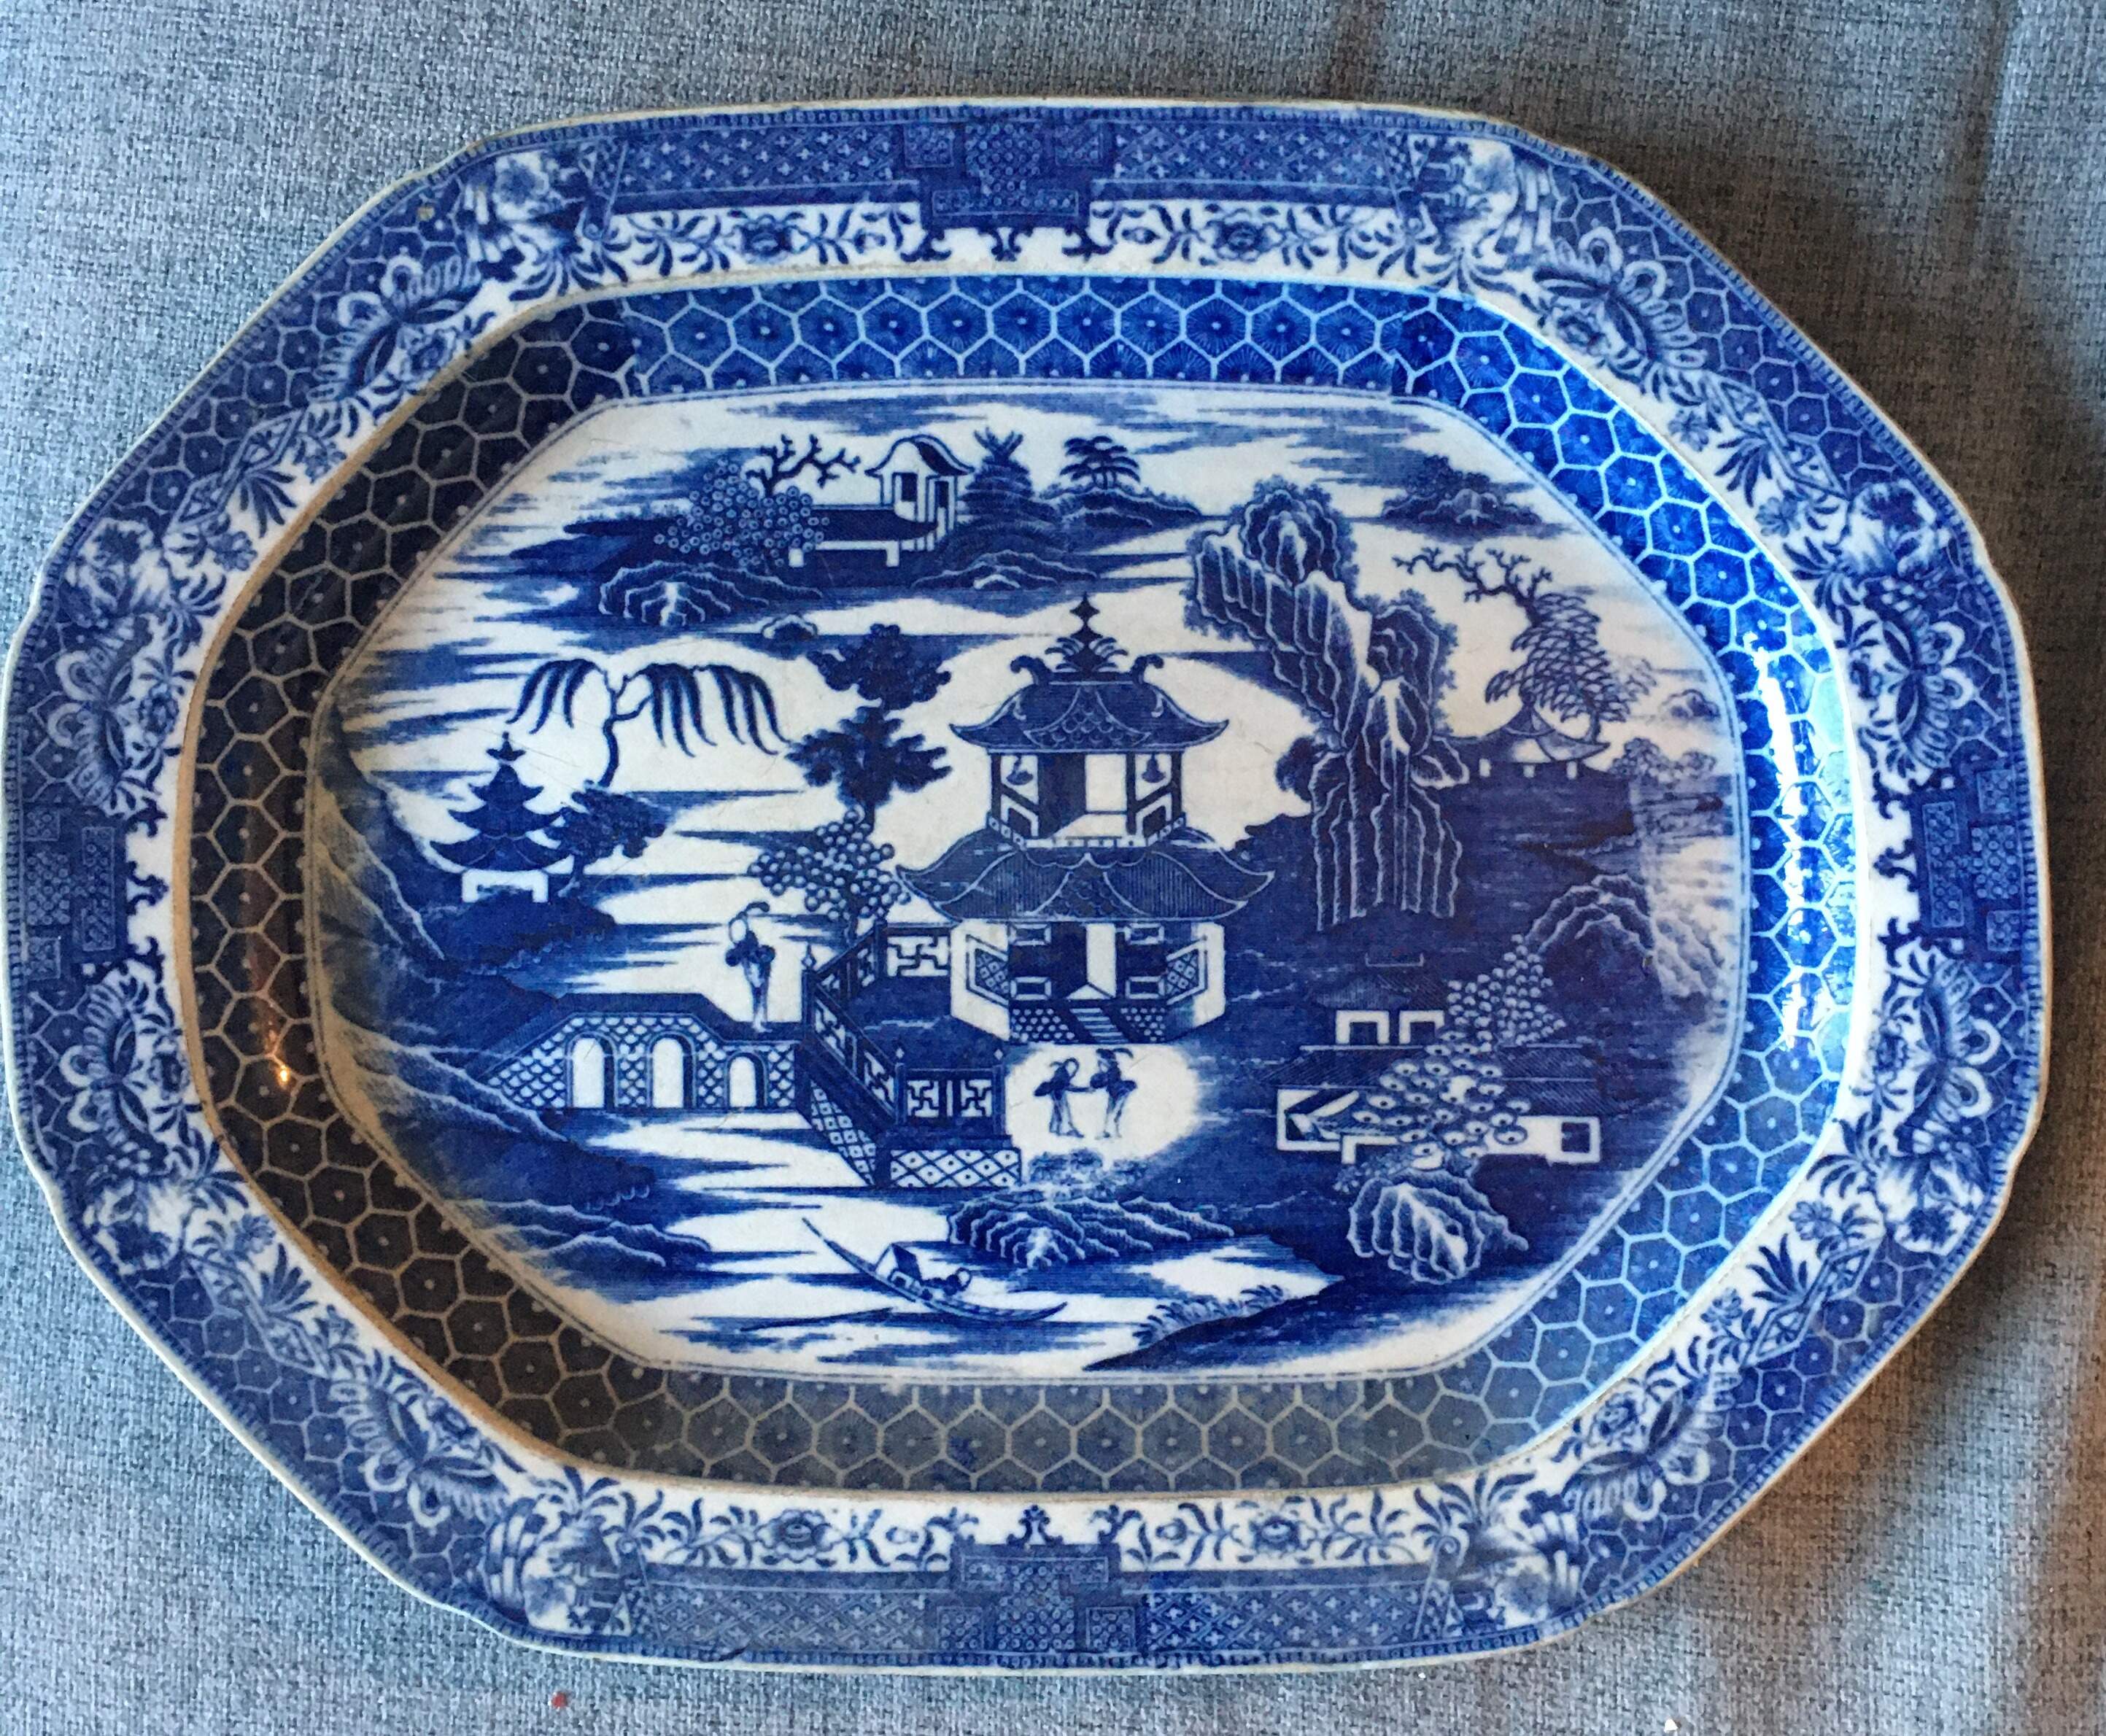 Spode RARE Early Blue and White Pearl Ware Large Meat Plate c1780